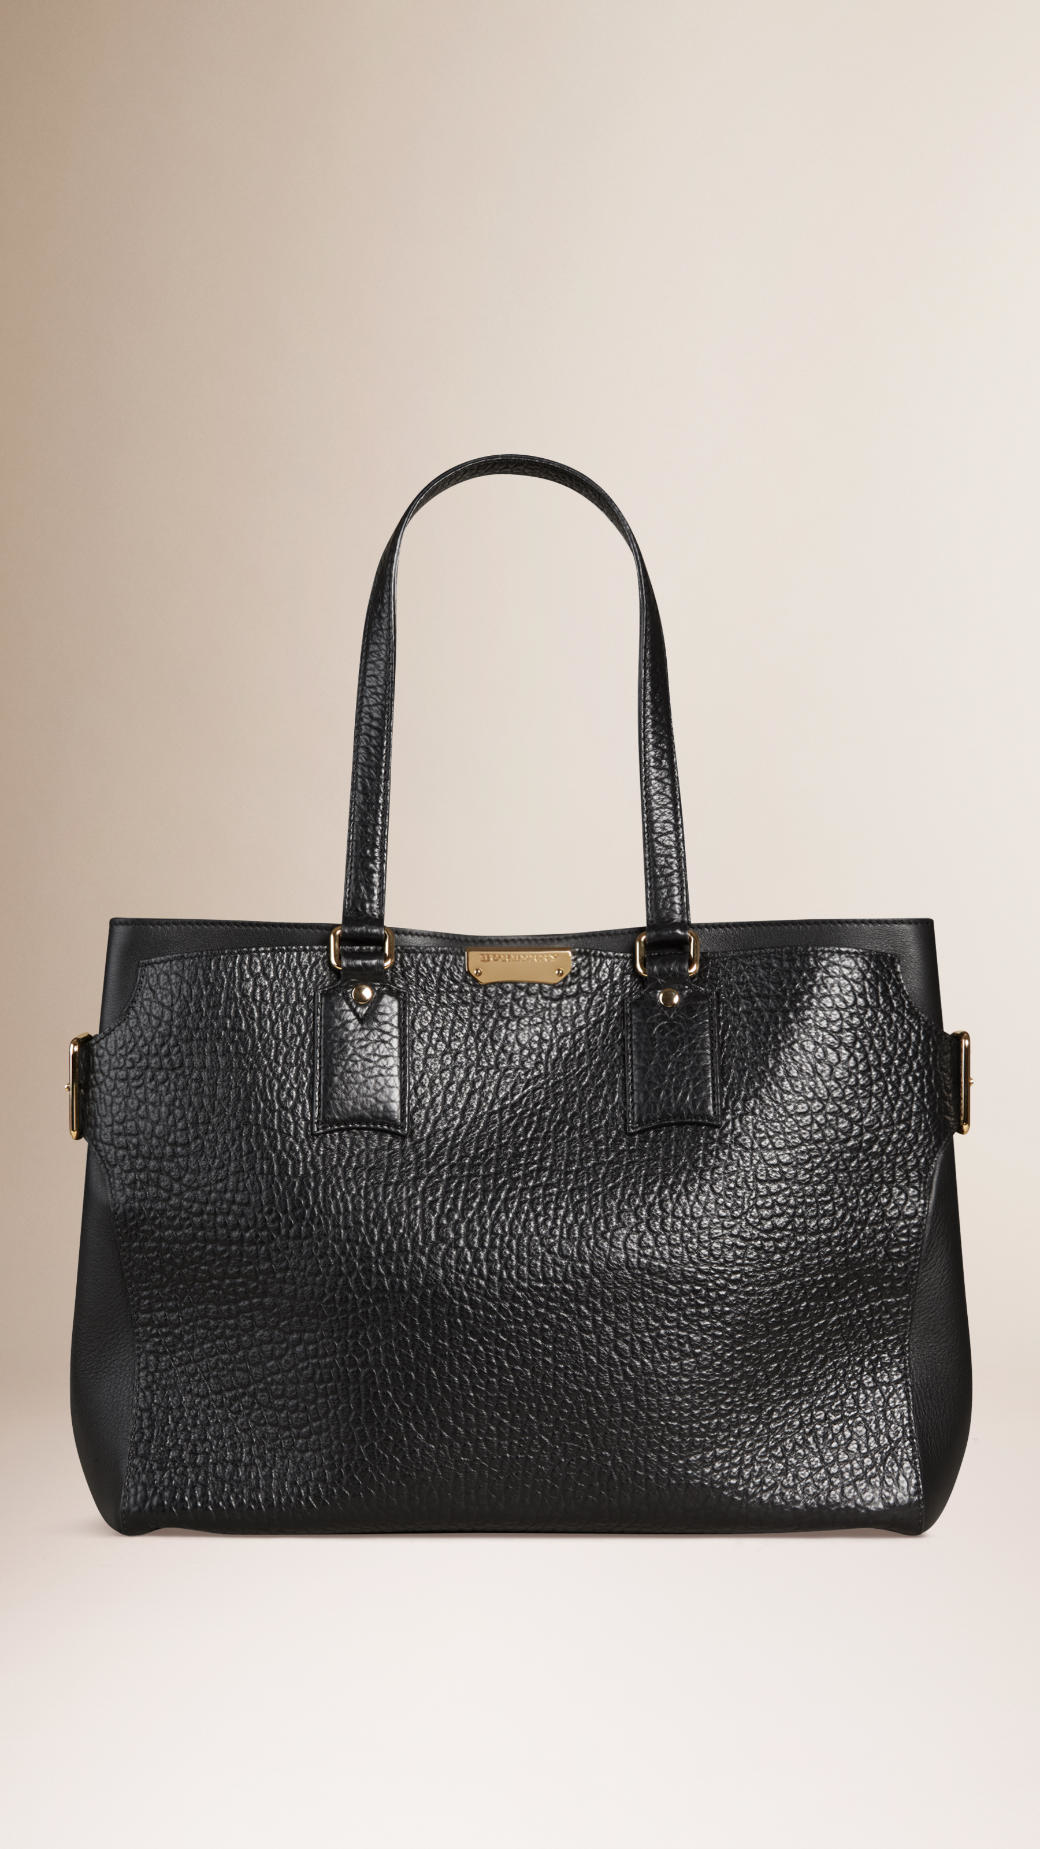 Lyst - Burberry Large Signature Grained Leather Tote Bag in Black